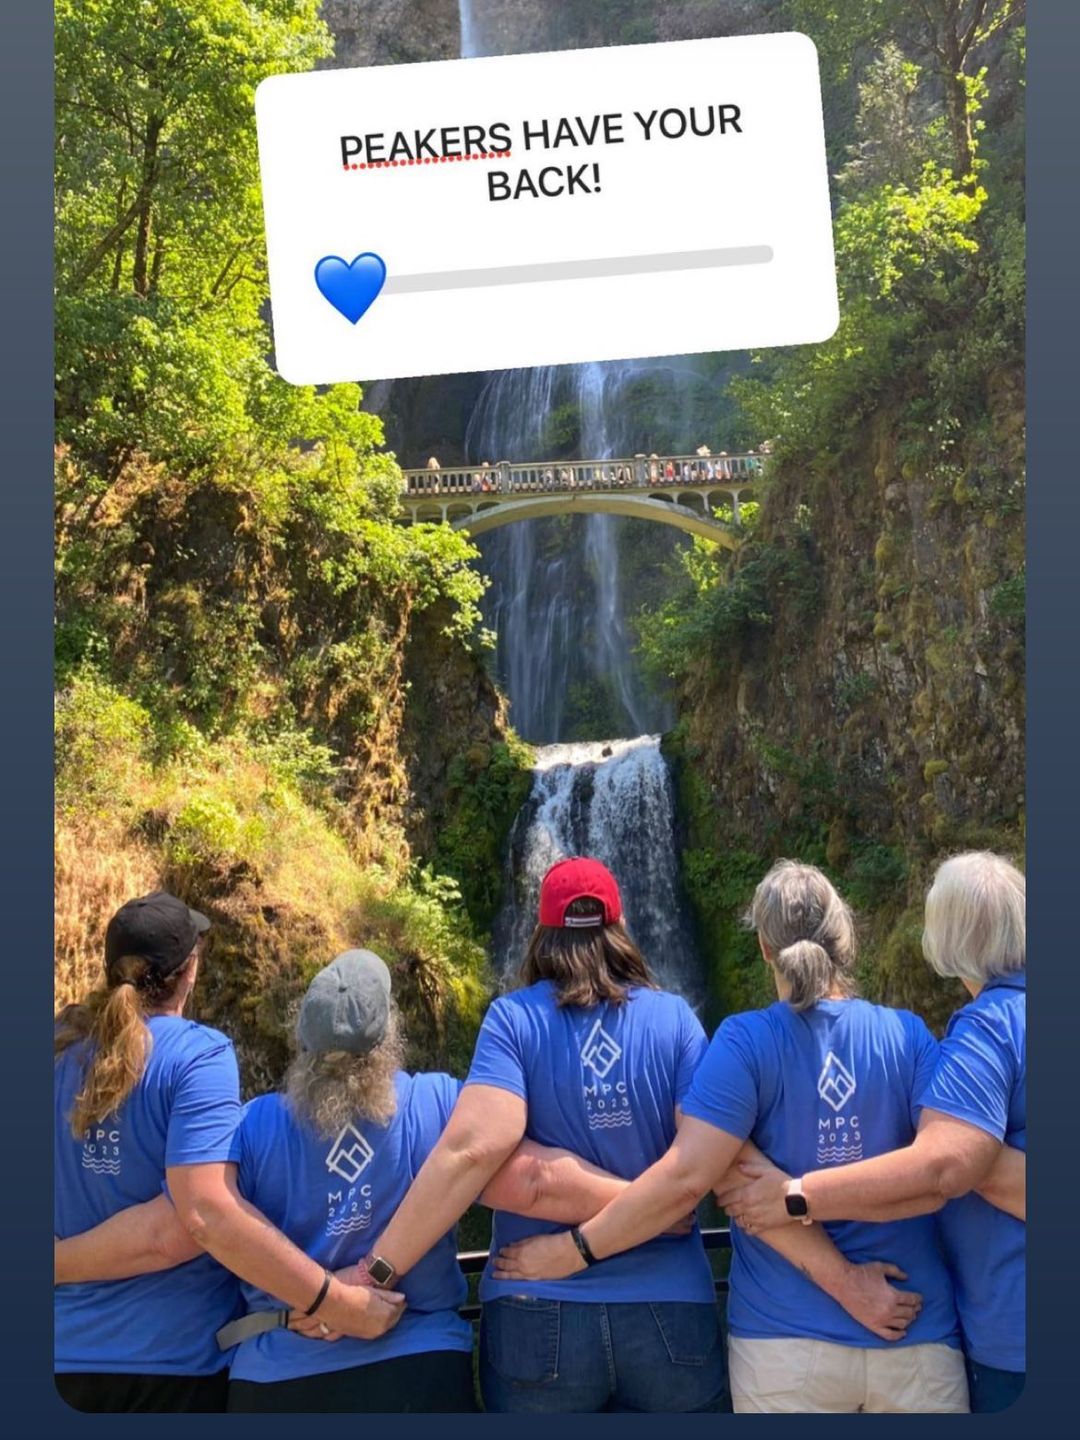 An instagram story which shows the peakers back to back in front of an amazing waterfall vista